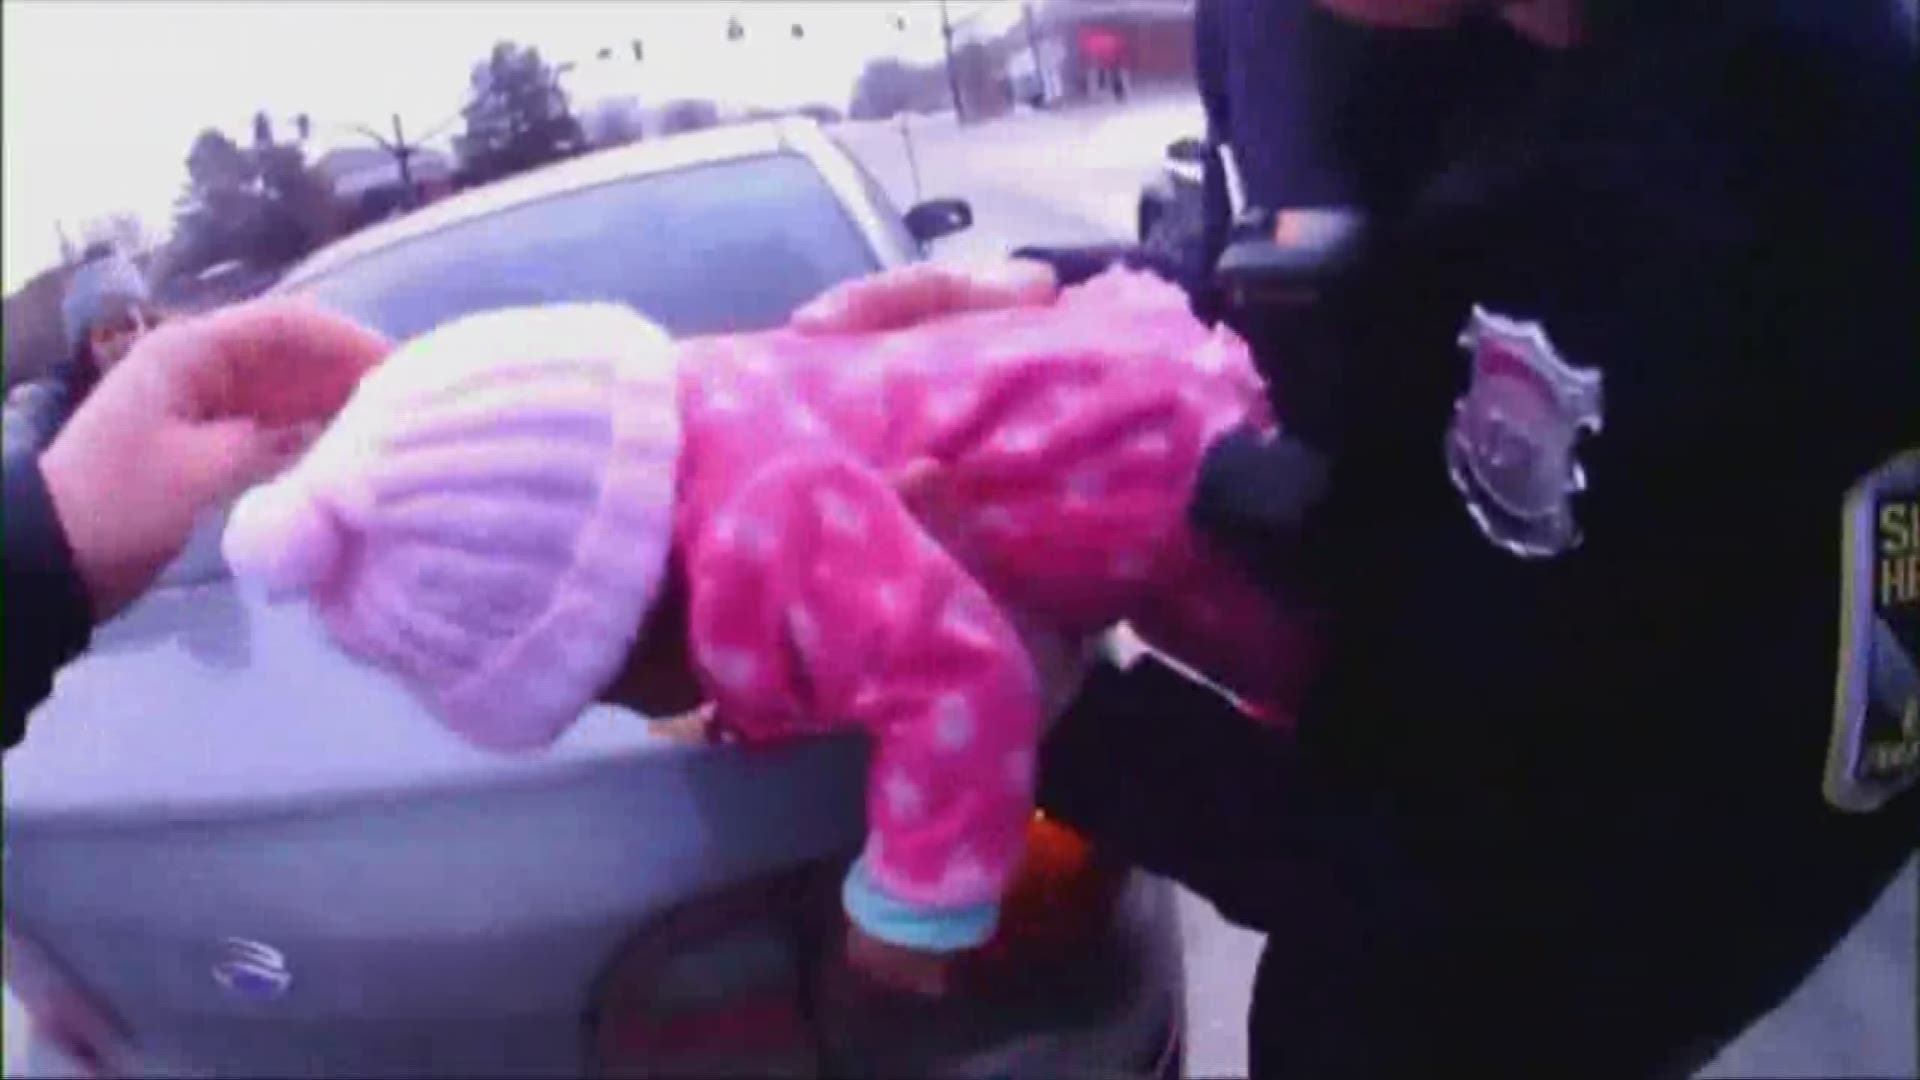 Shaker Heights police officers standing in traffic save choking infant